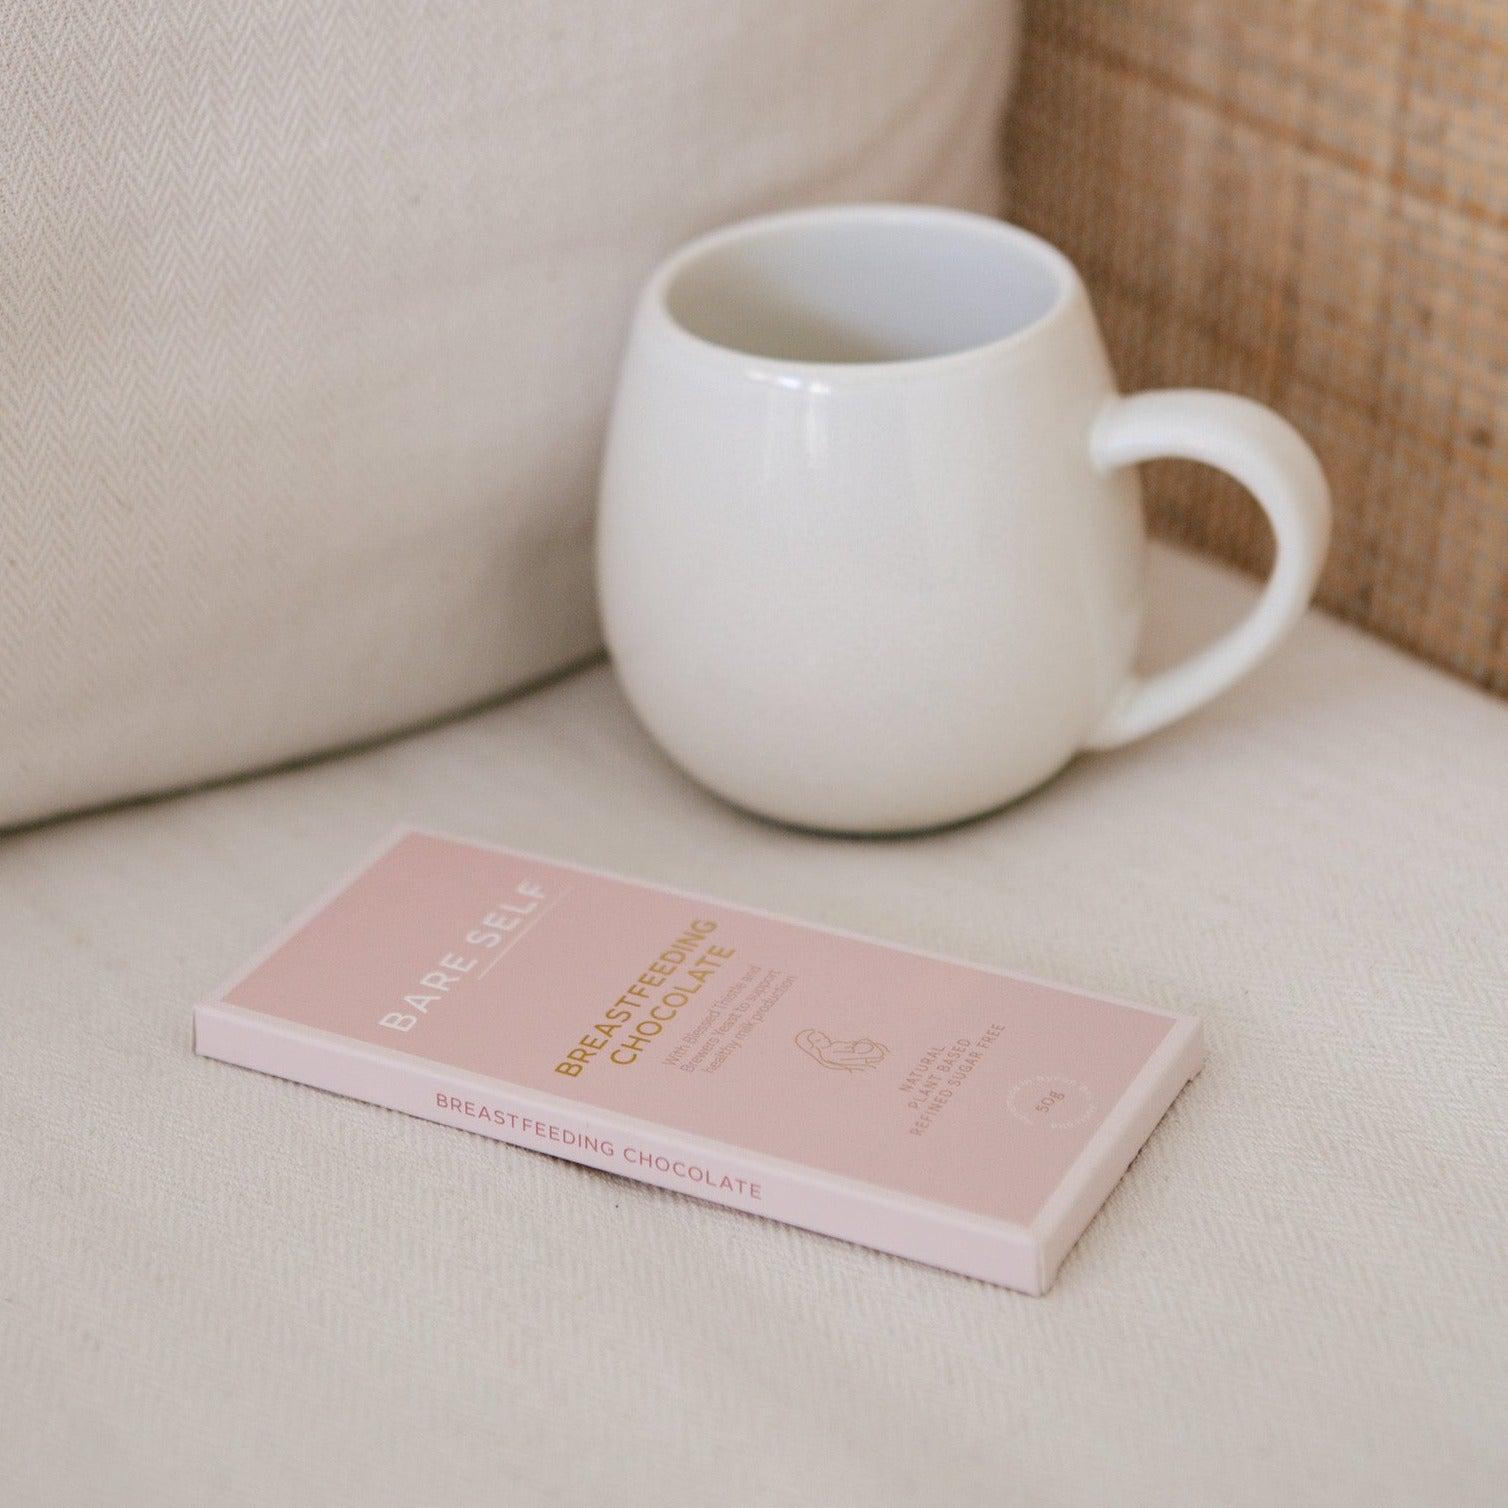 A cup of Bare Self coffee and a Bare Self breastfeeding chocolate bar on a white couch.